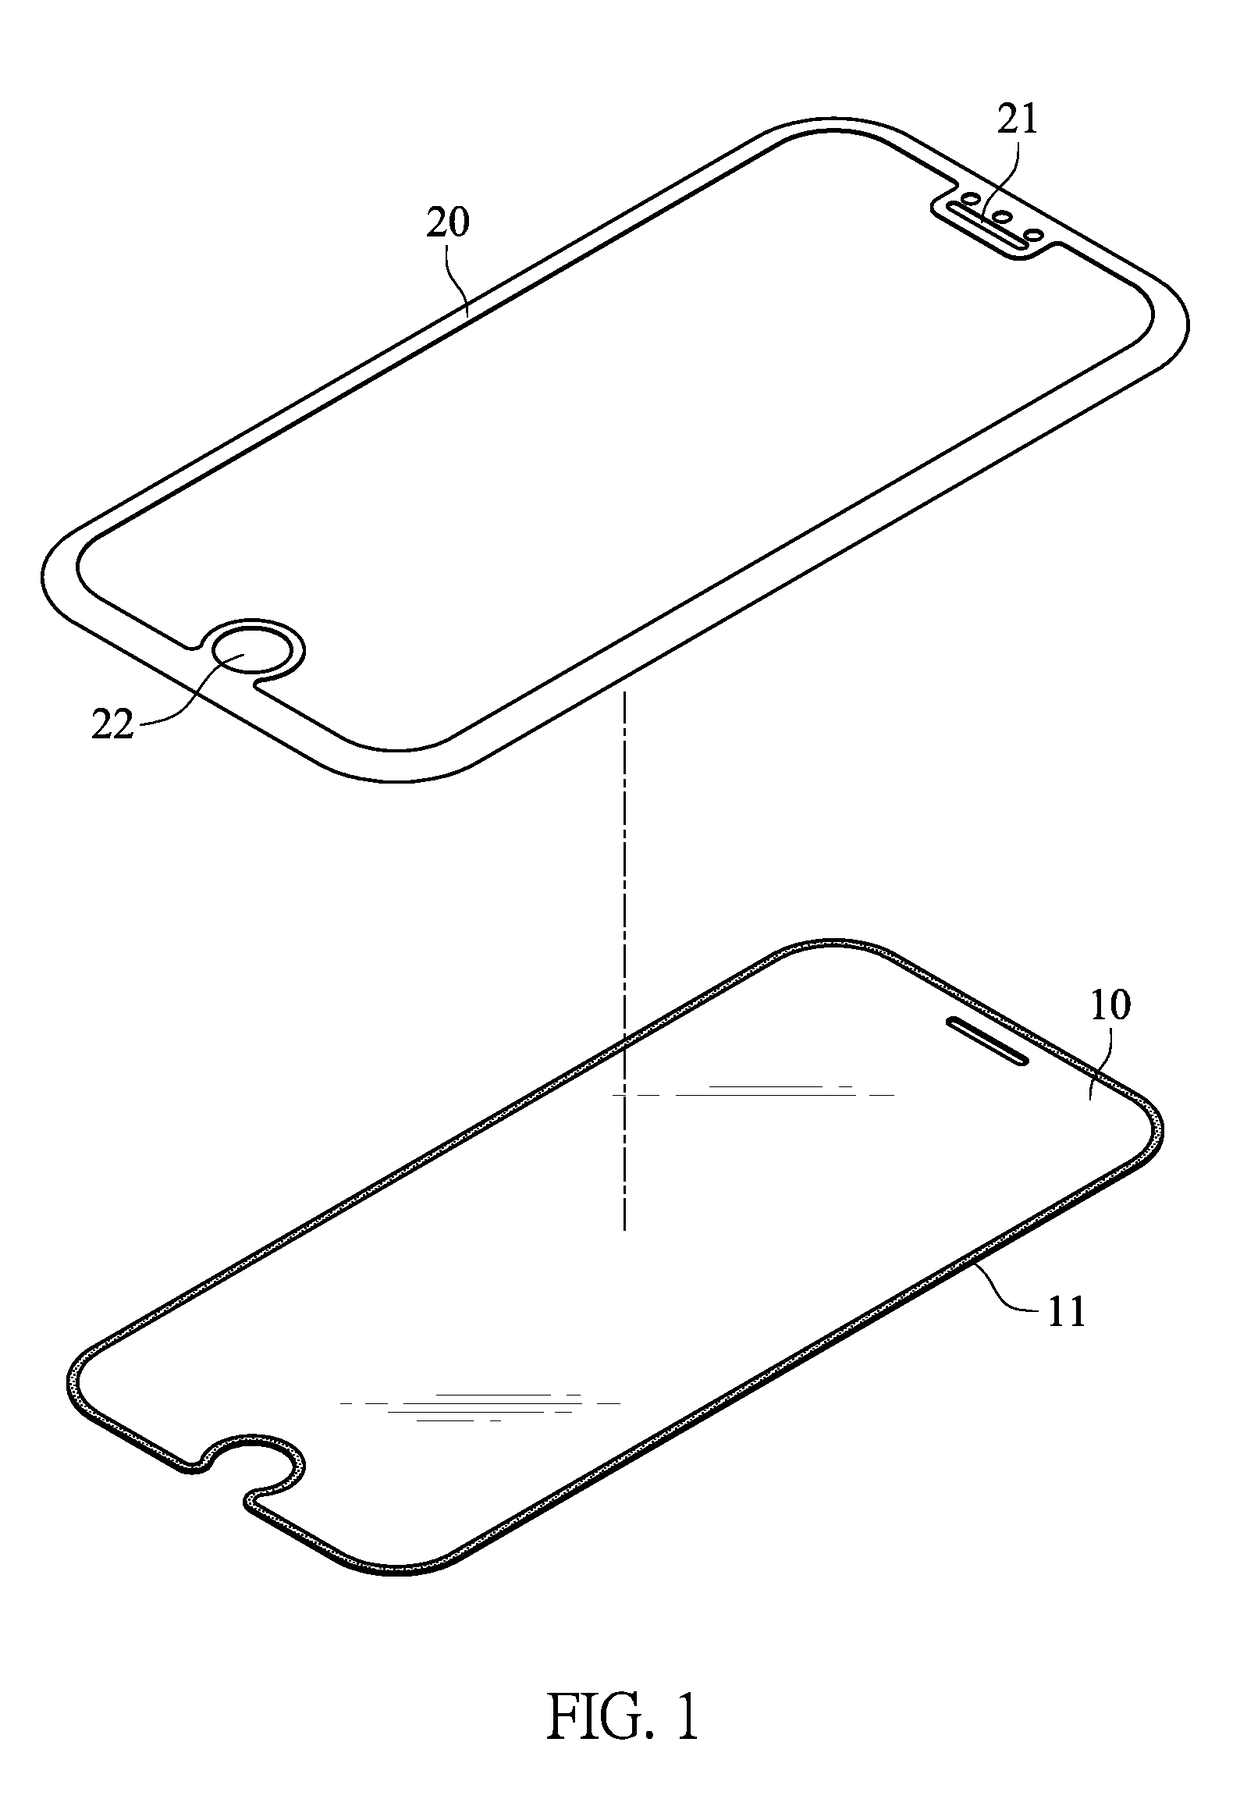 Curved screen protector